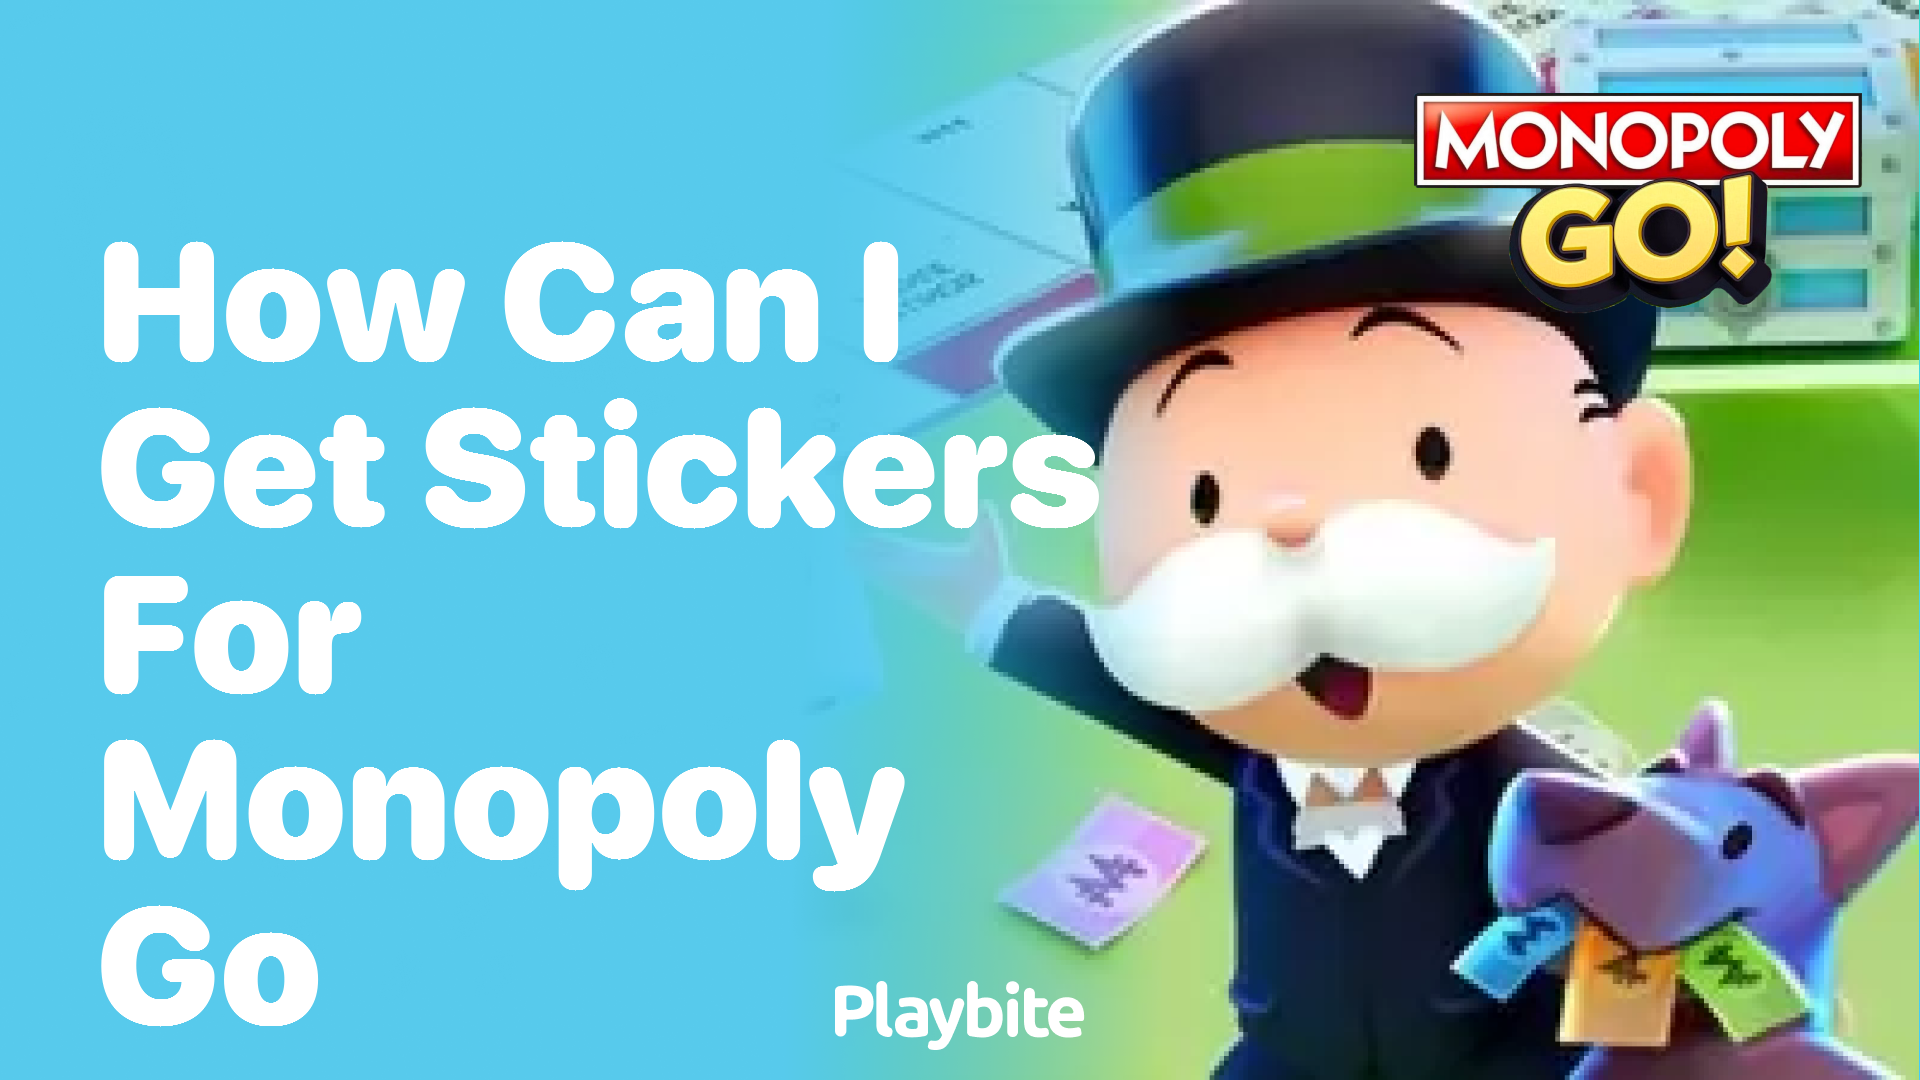 How Can I Get Stickers for Monopoly Go?